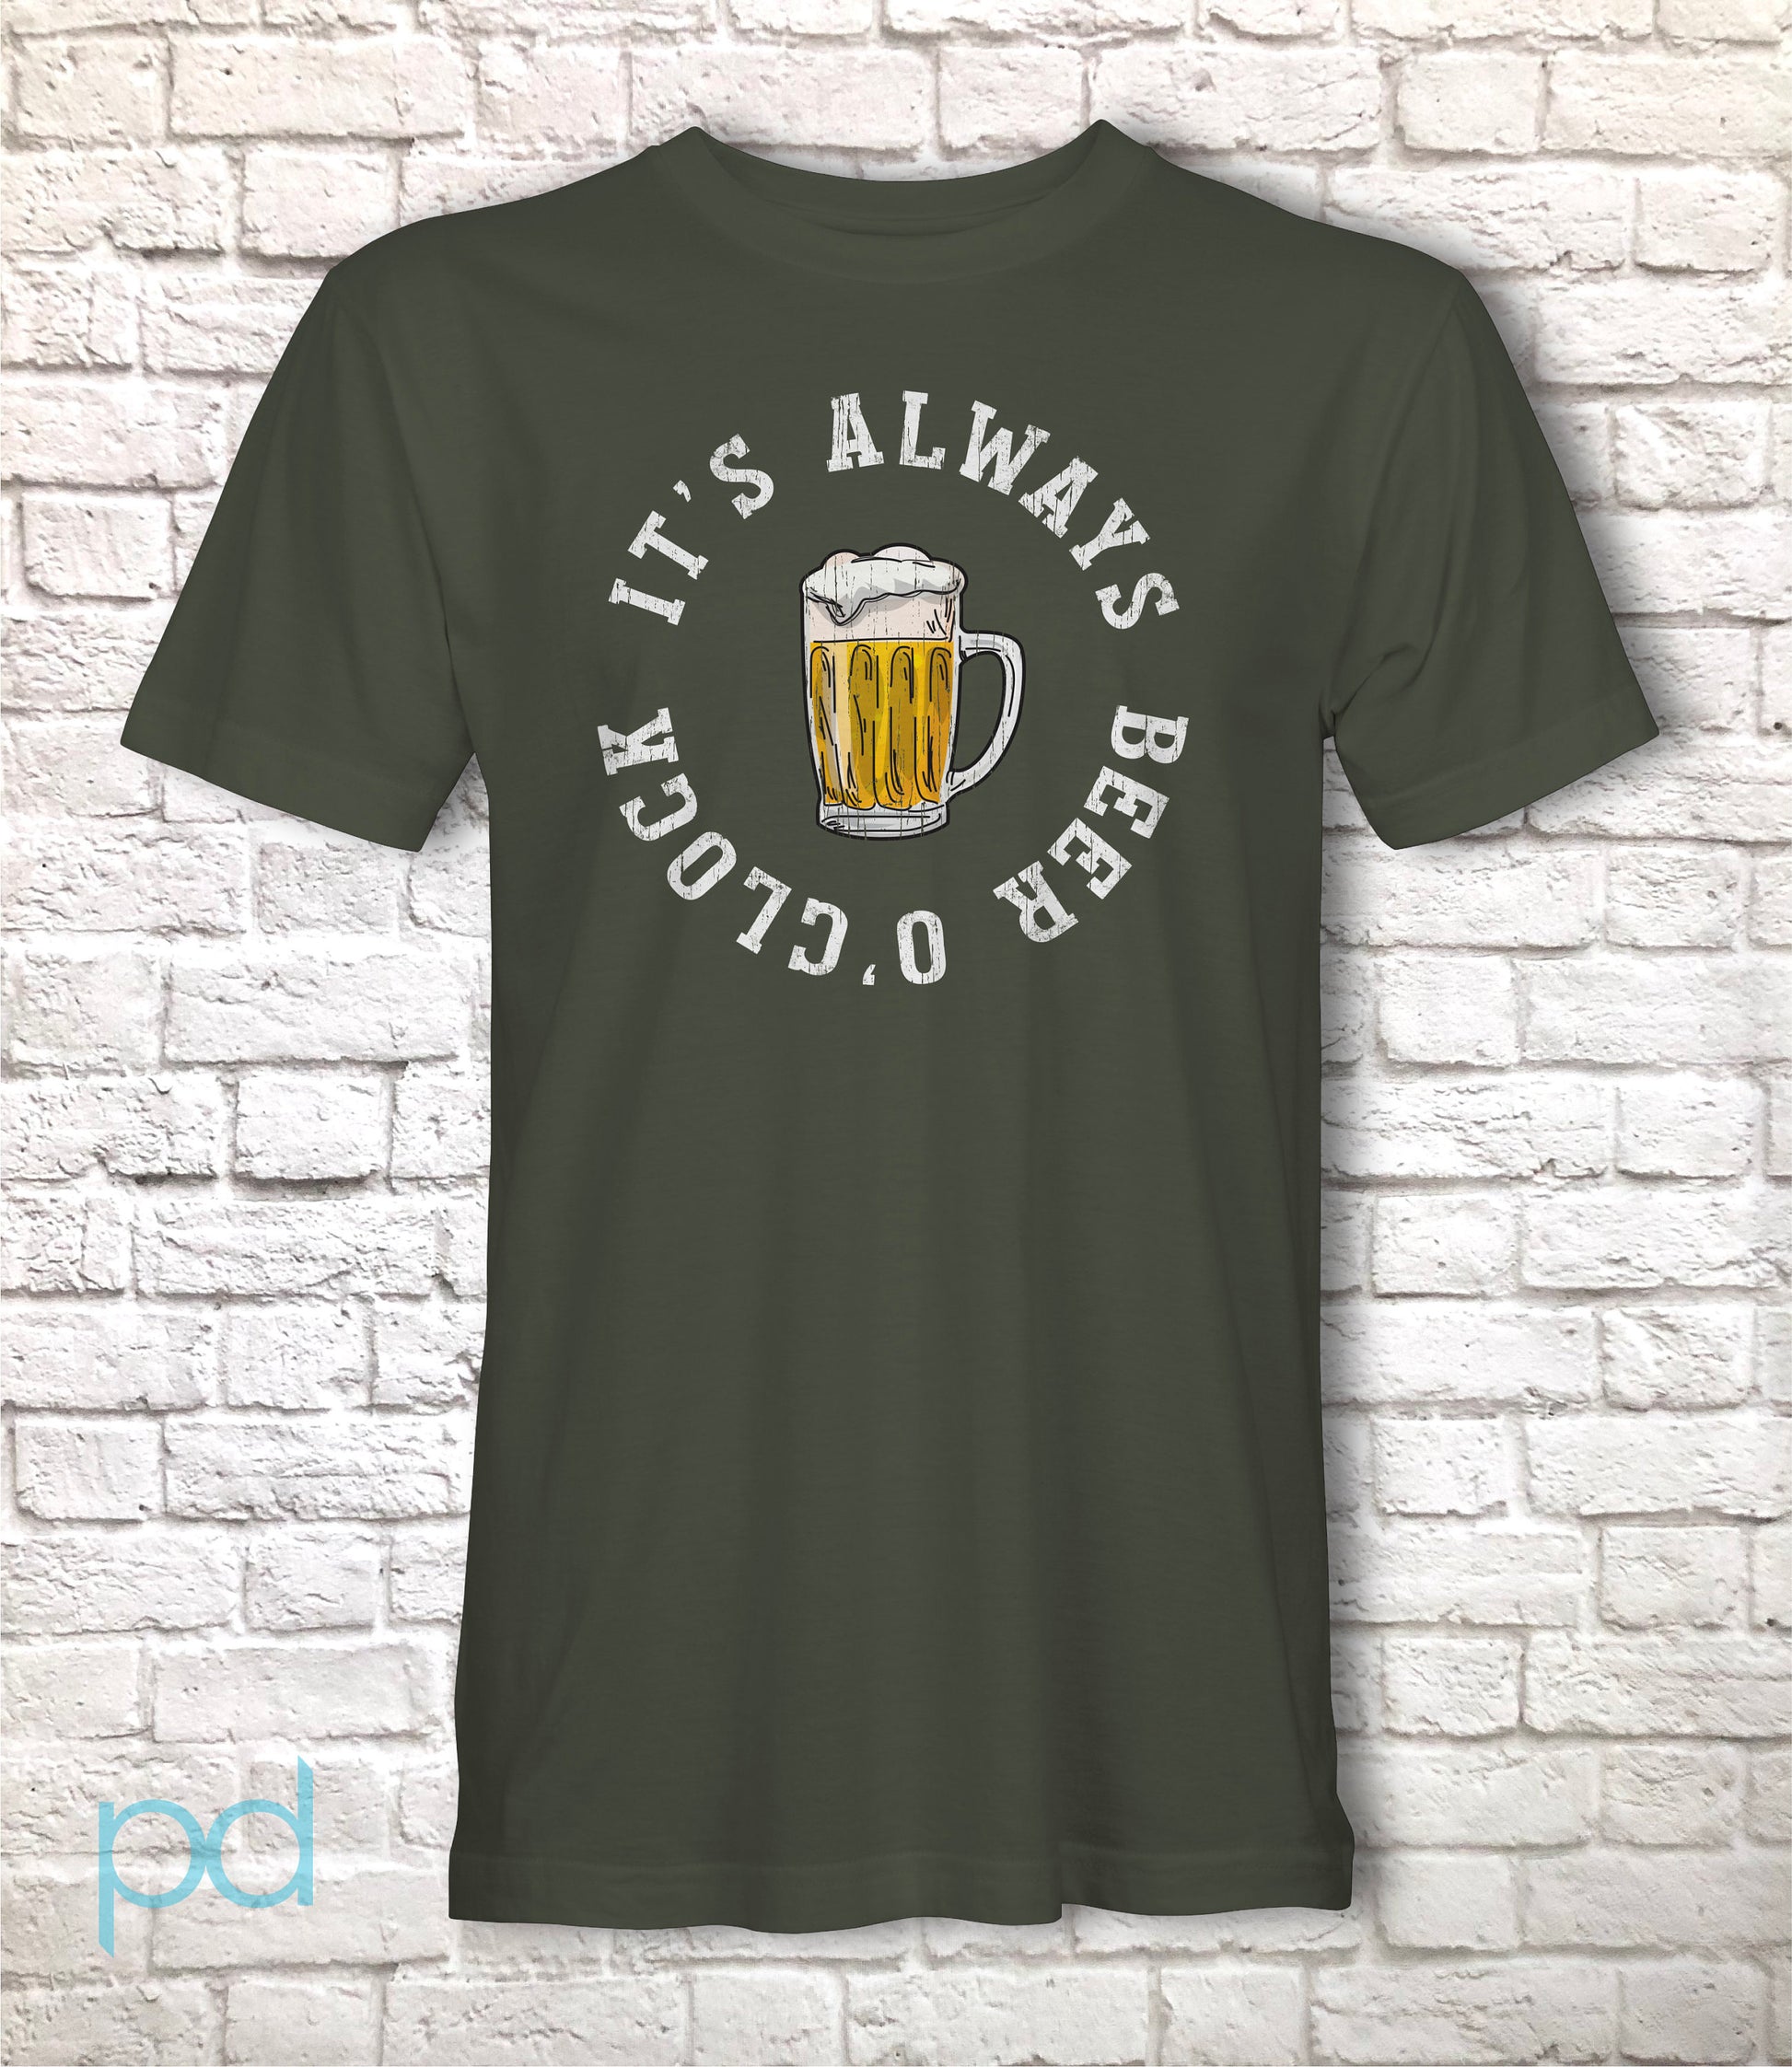 Funny Drinking T-Shirt, Beer o&#39;Clock Pub Meme Gift Idea, Humorous Pint of Lager Graphic Print Tee Shirt Top